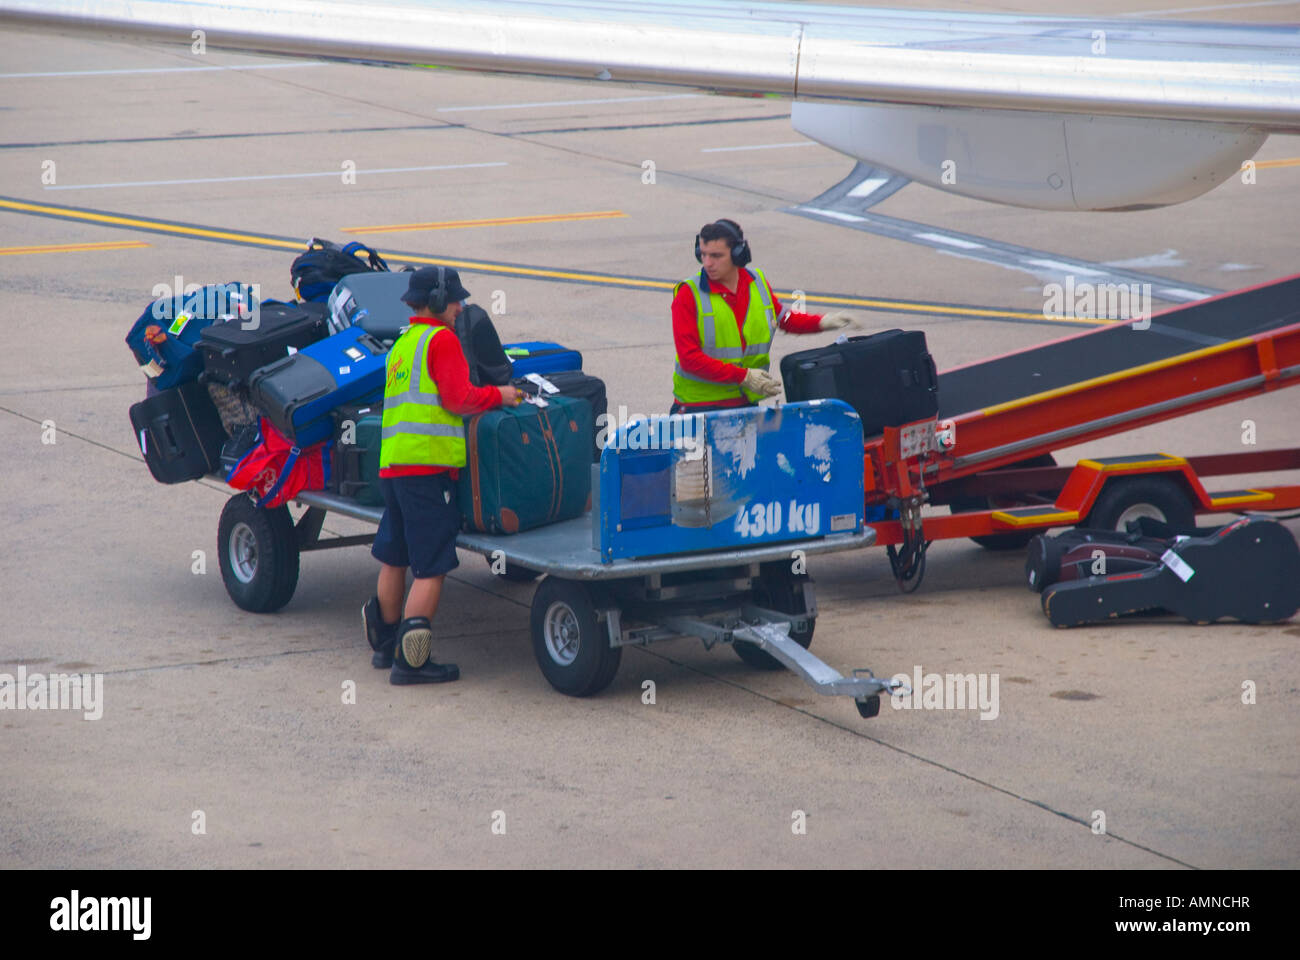 Baggage handlers loading luggage onto a passenger aircraft in Sydney Australia Stock Photo